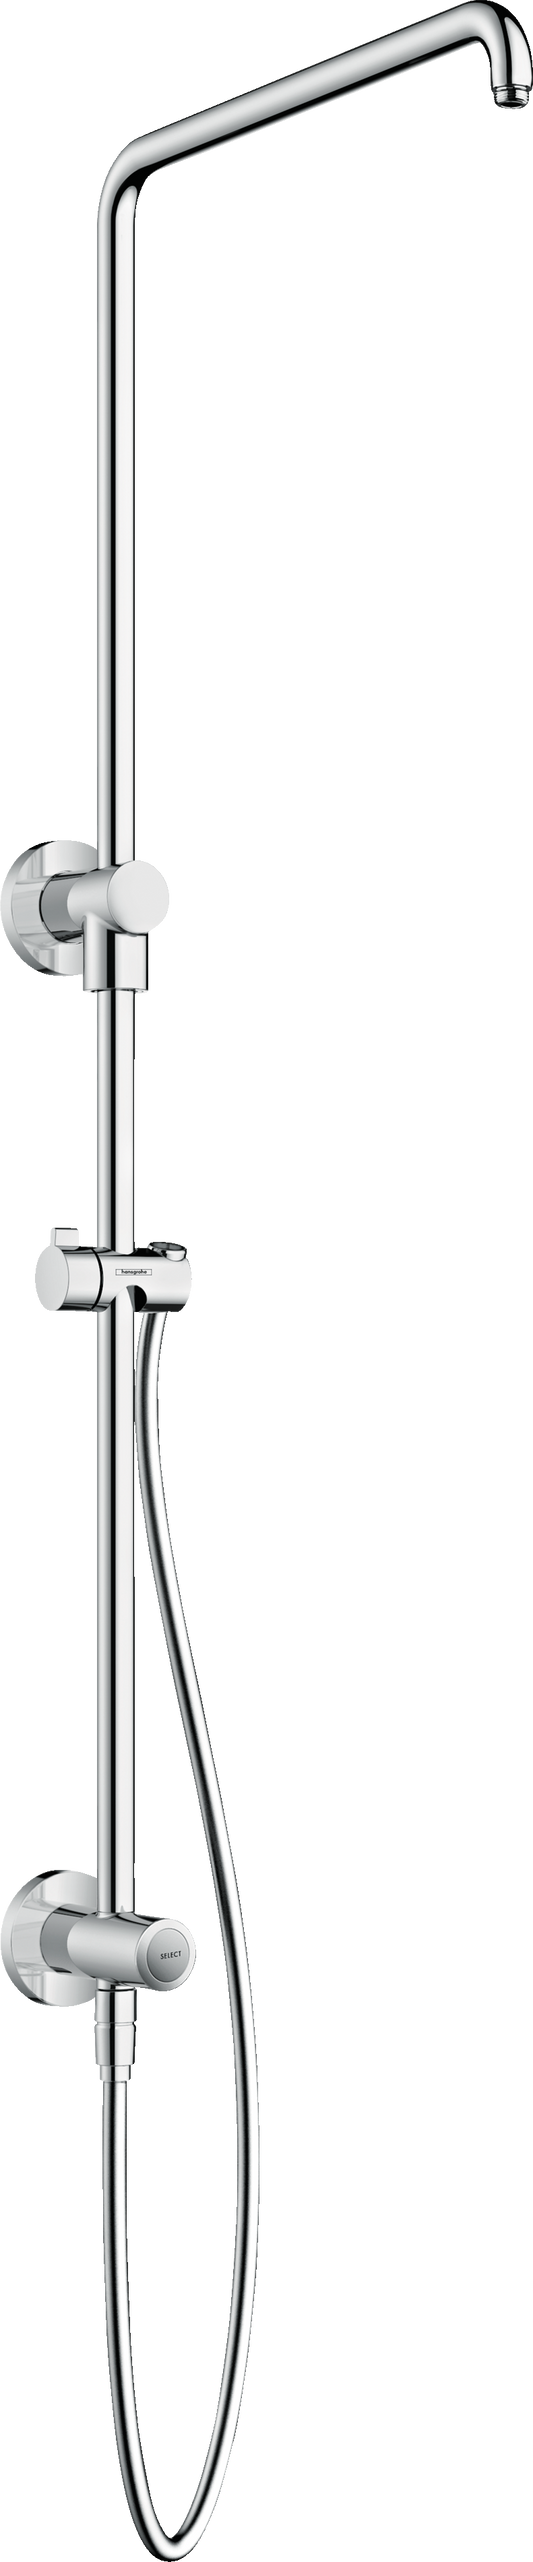 Croma Select S Showerpipe Reno EcoSmart without shower components